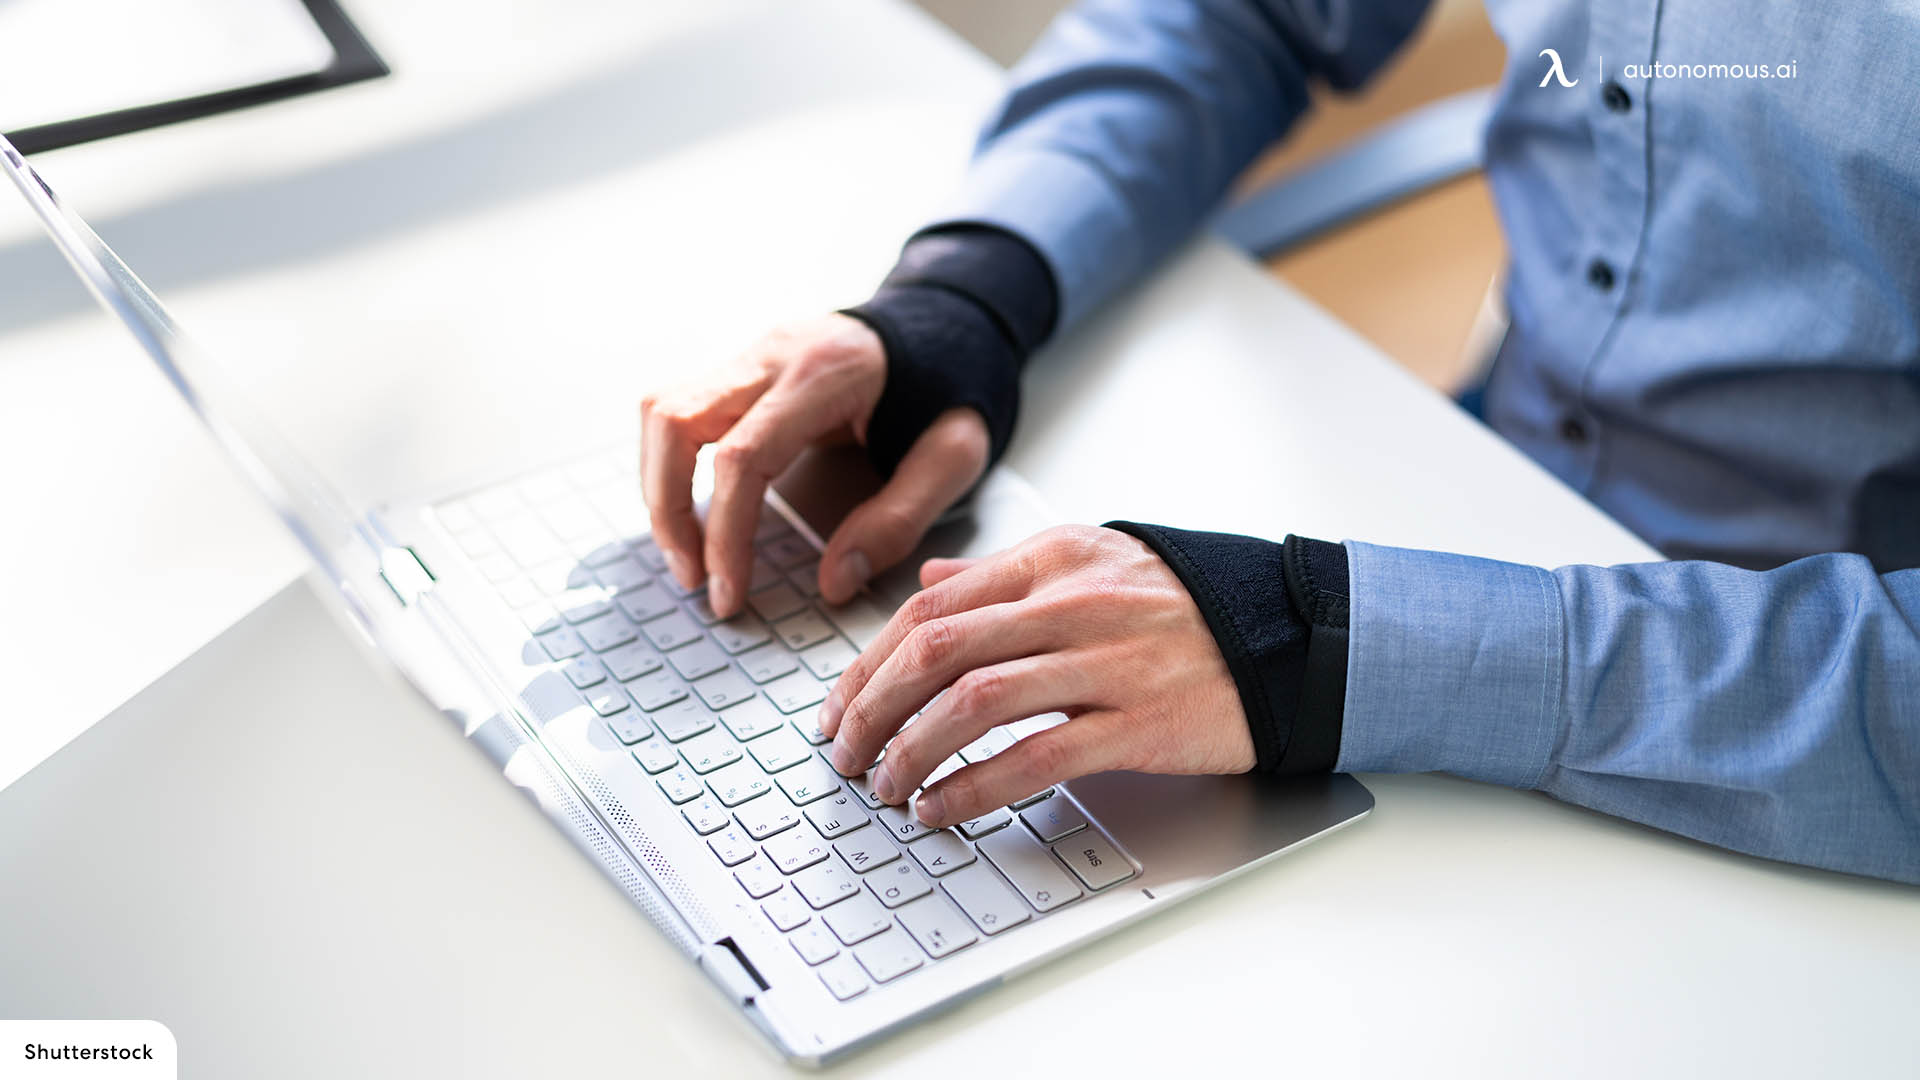 Wrist Pain from Typing: How Can You Avoid it?